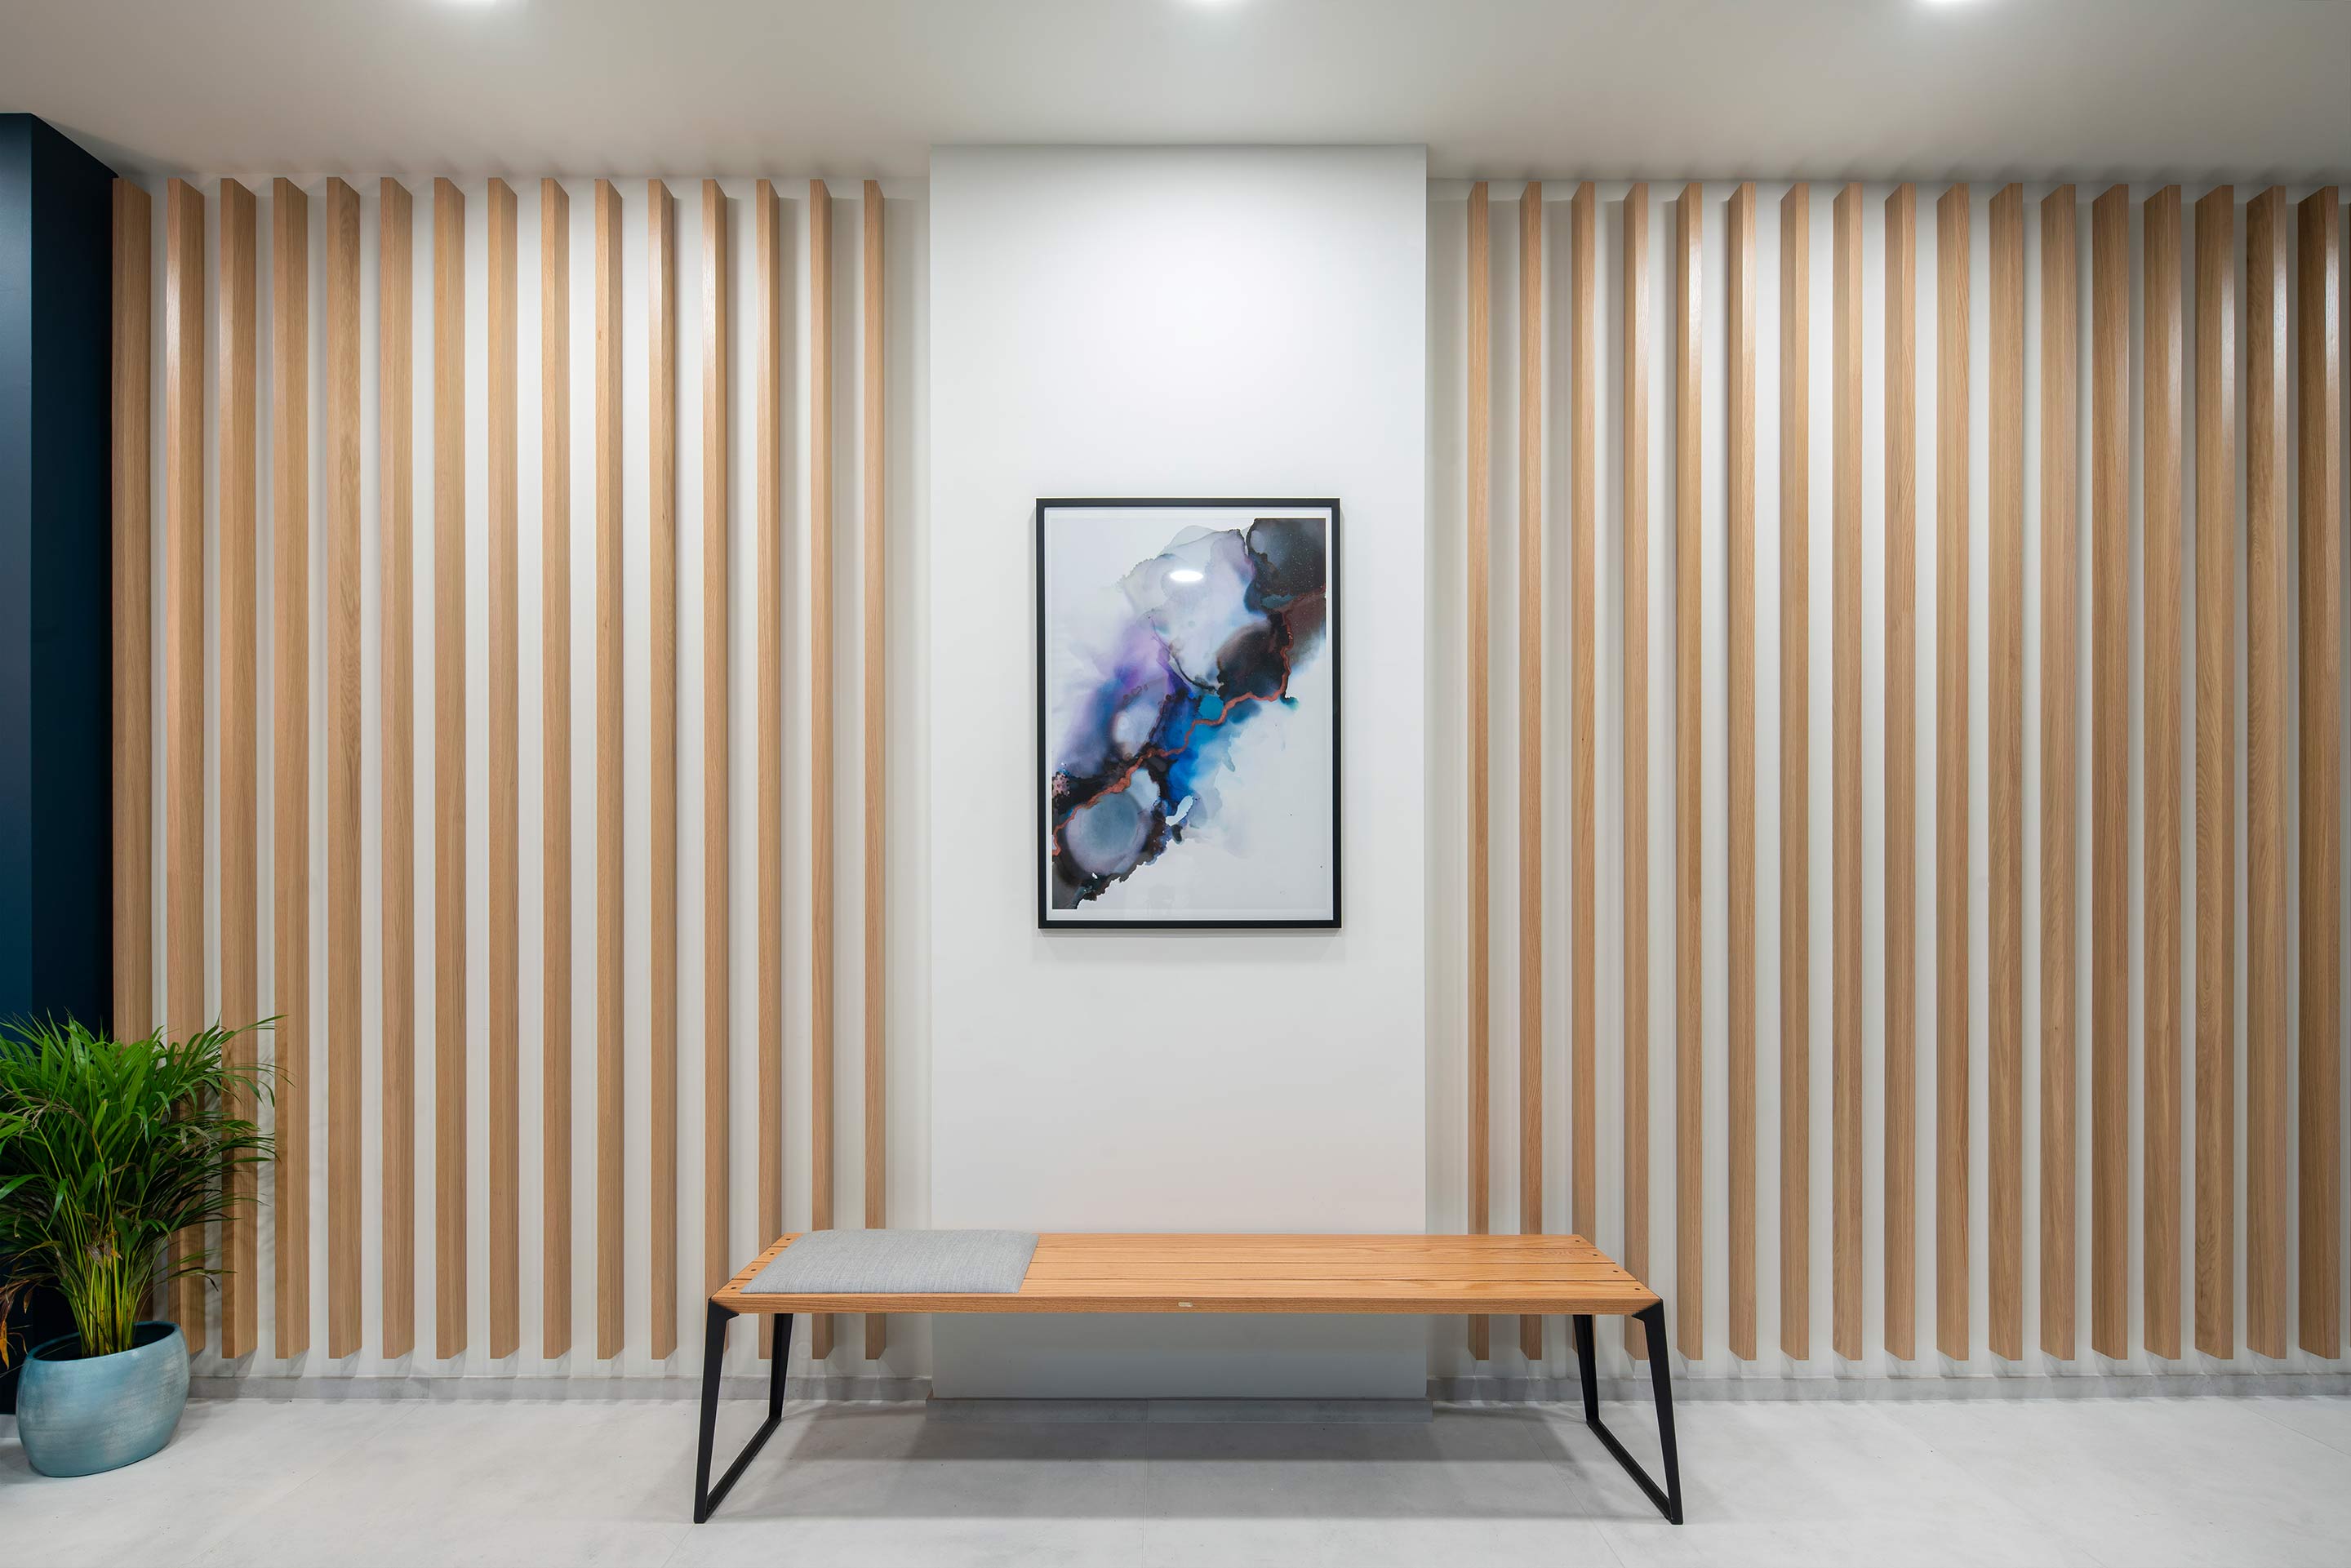 Wood paneling and artwork